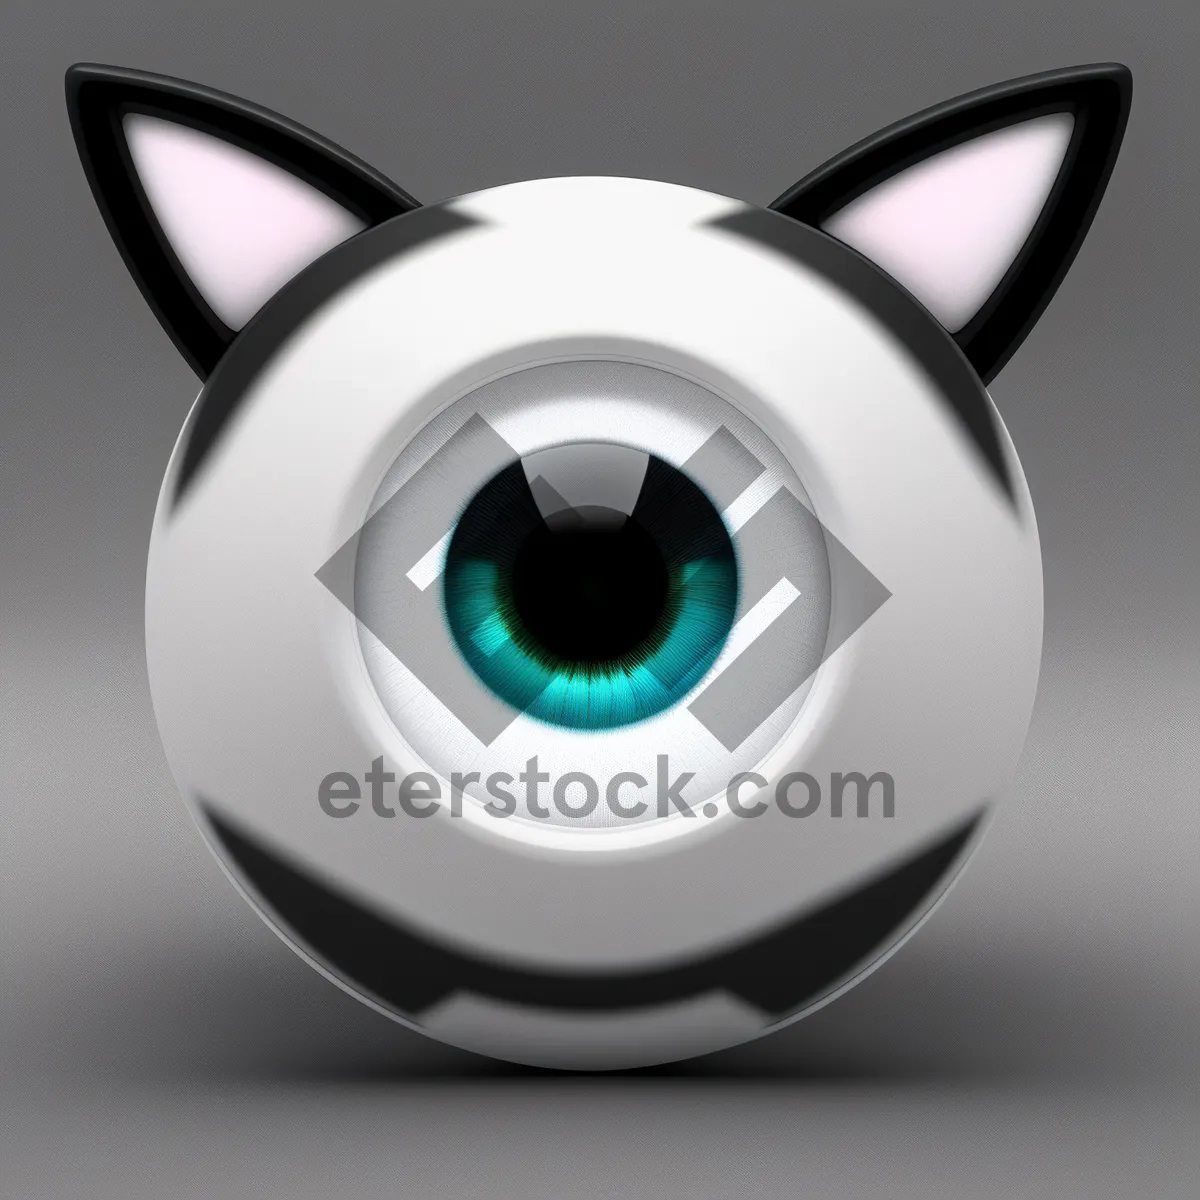 Picture of Modern Black Glossy Web Button with 3D Shadow.